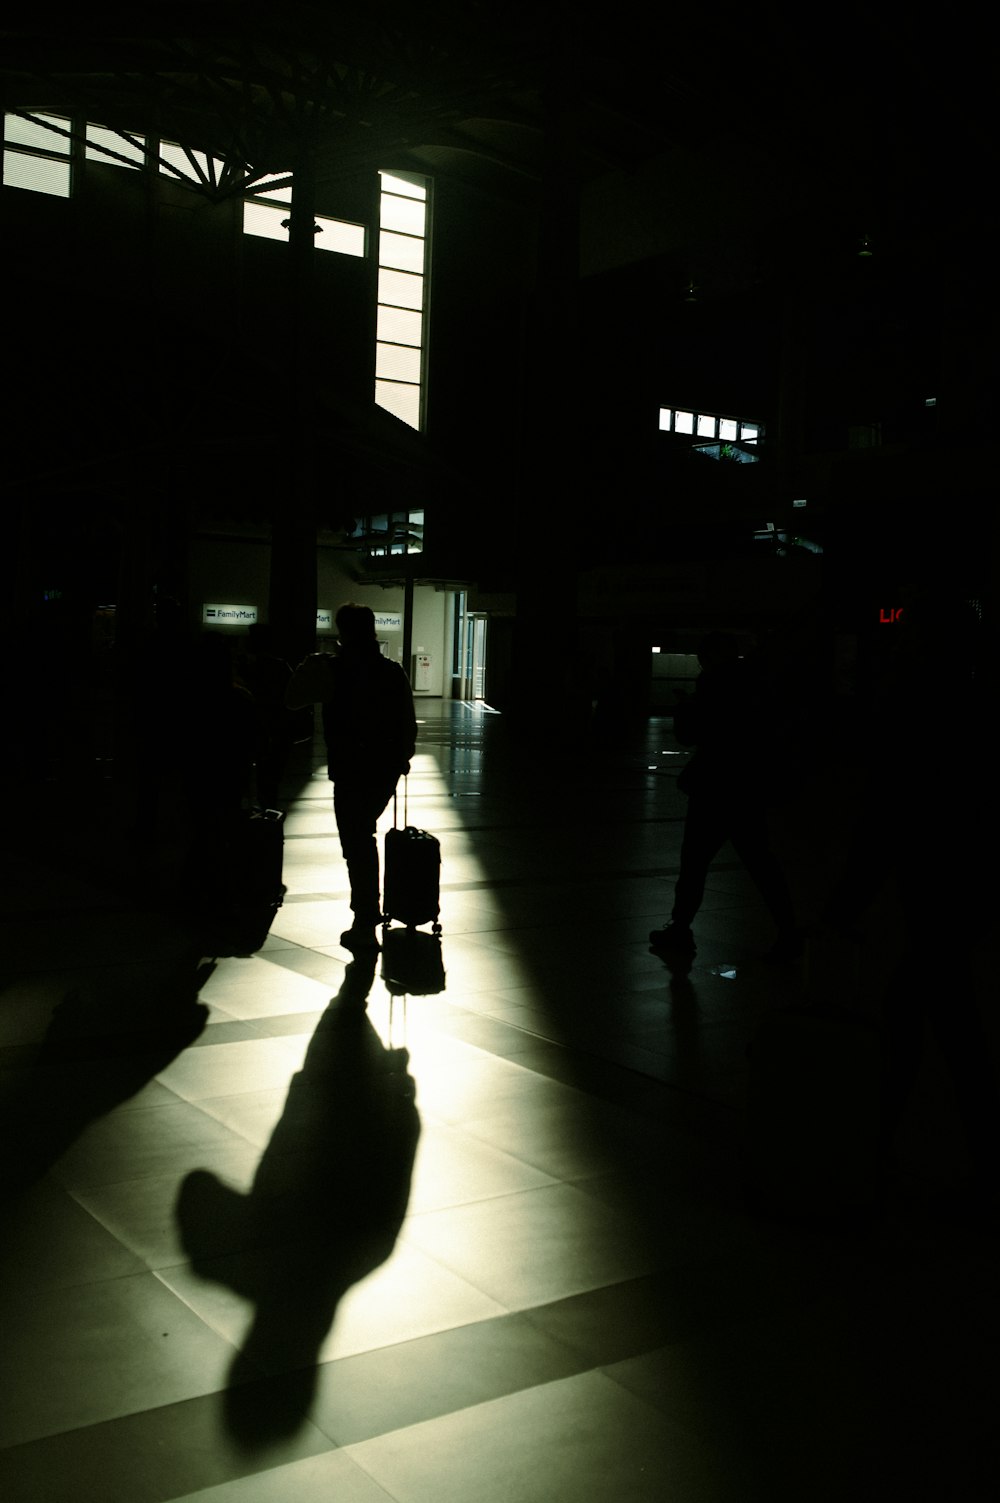 a shadow of a person pulling a suitcase